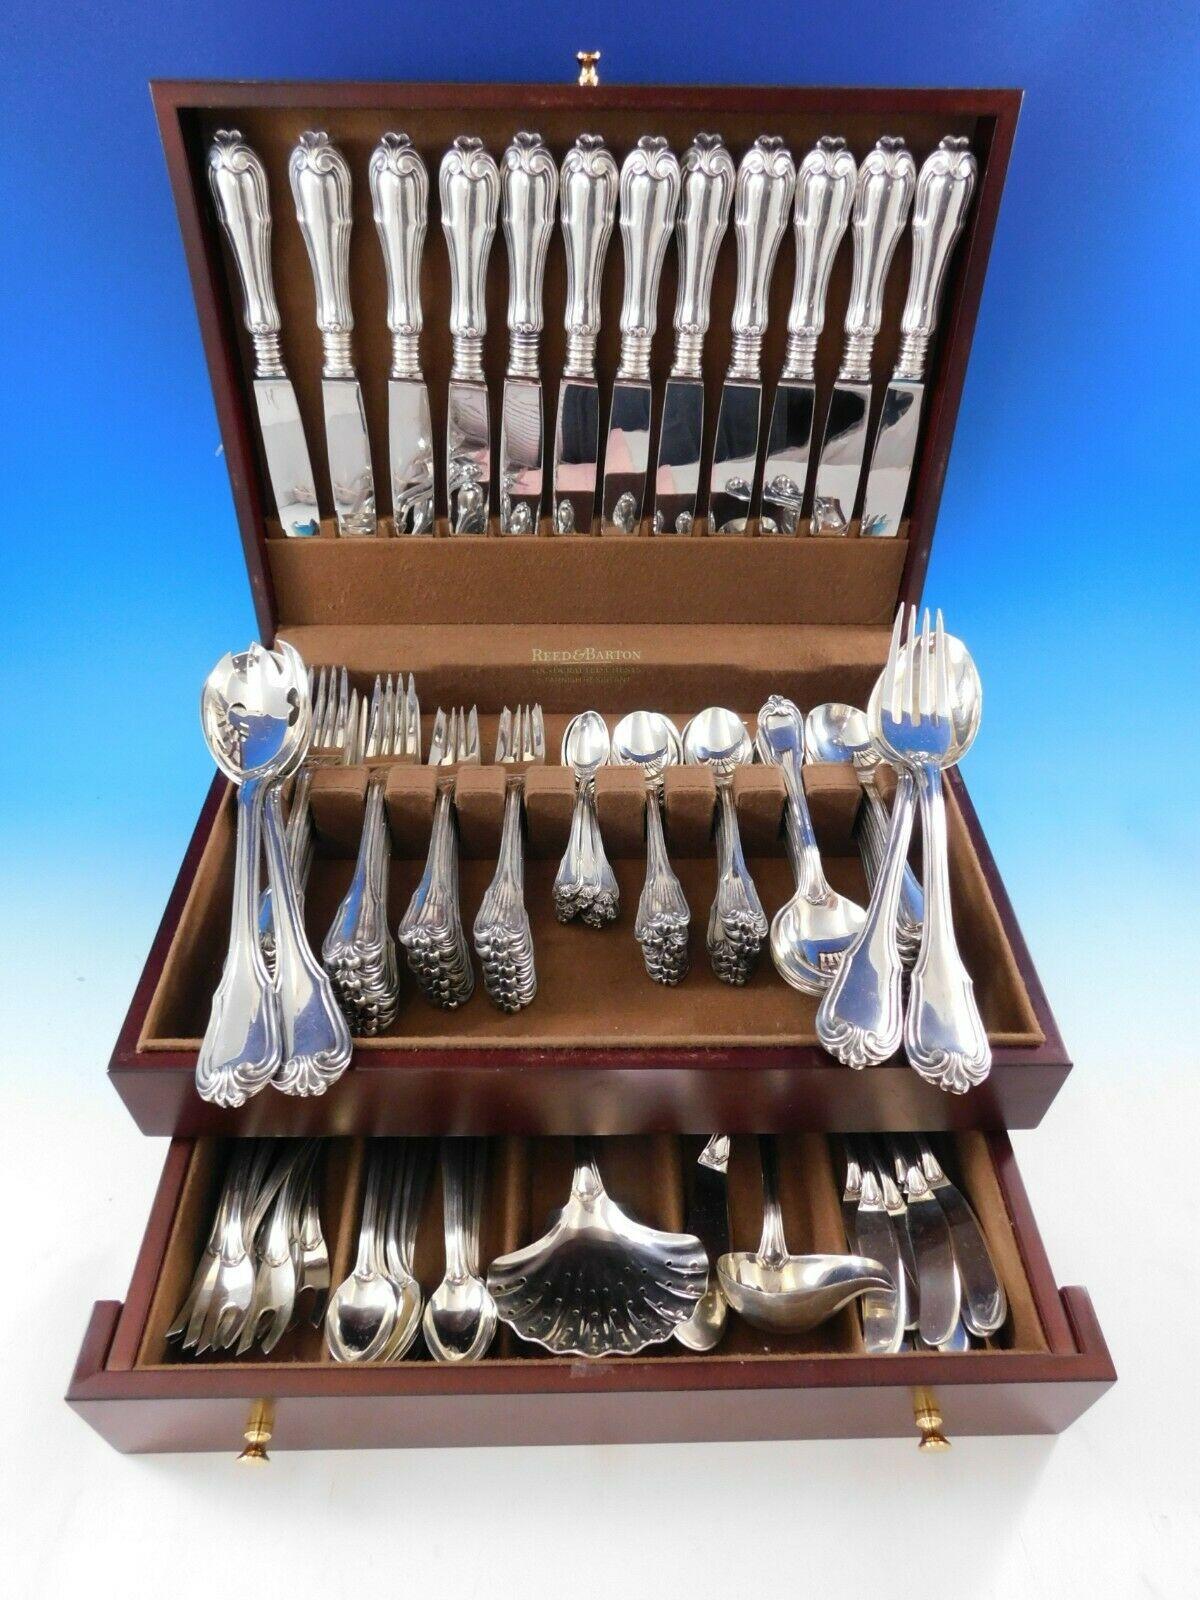 Masterfully crafted Borgia by Buccellati sterling silver flatware set, 115 pieces. This impressive cutlery service includes:

12 dinner knives, 9 3/4